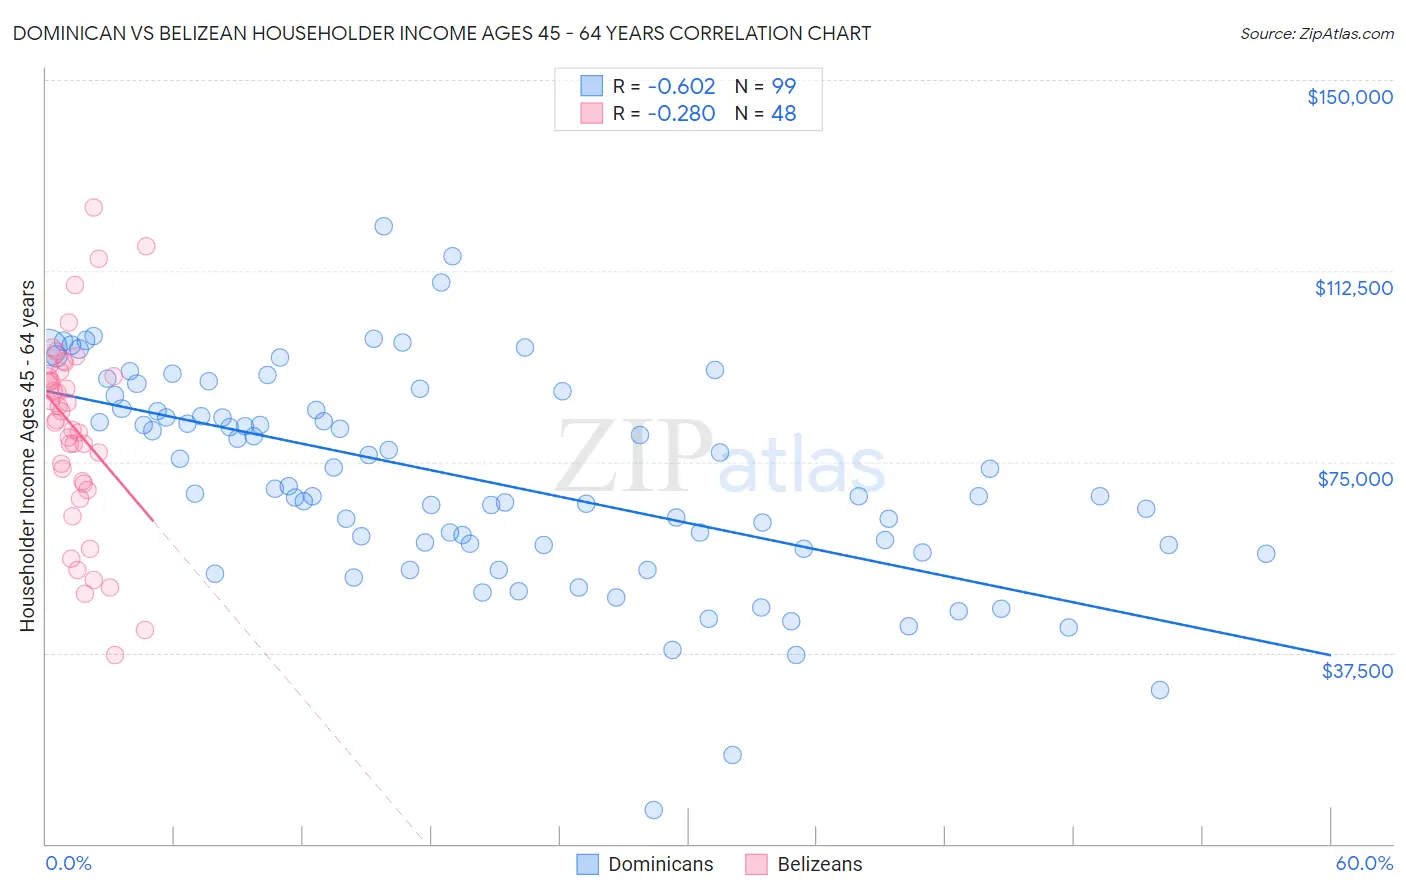 Dominican vs Belizean Householder Income Ages 45 - 64 years